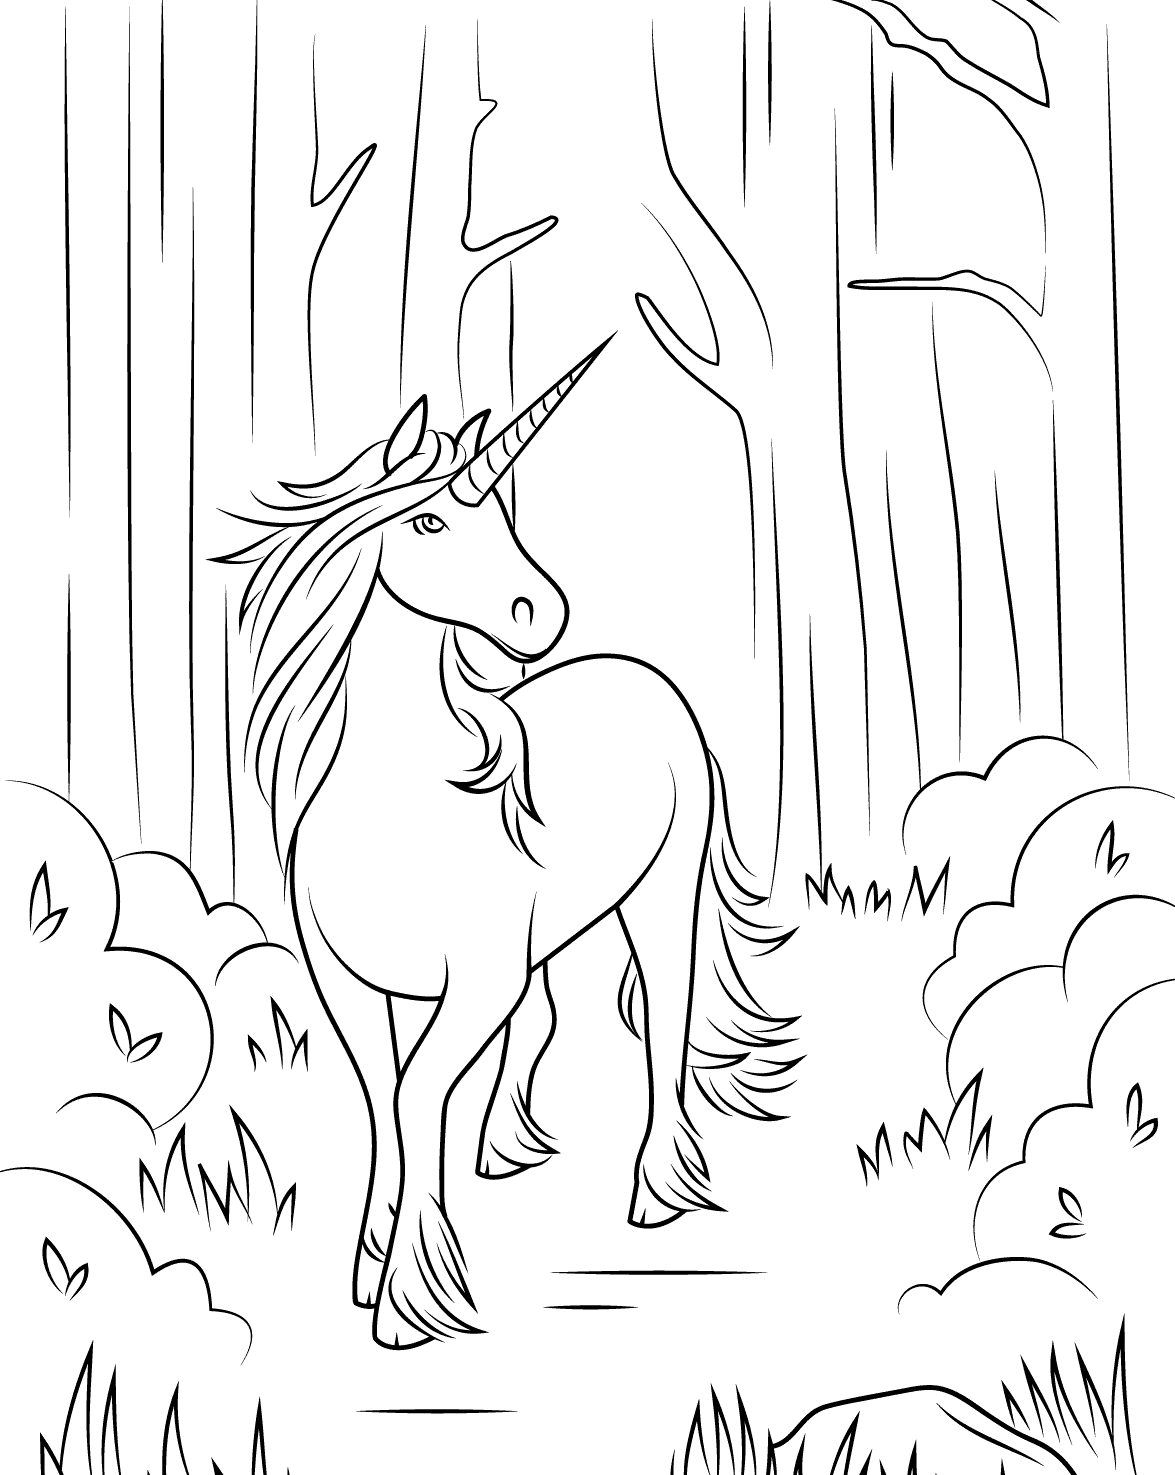 Unicorn Color Page Unicorn Coloring Pages For Adults Best Coloring Pages For Kids